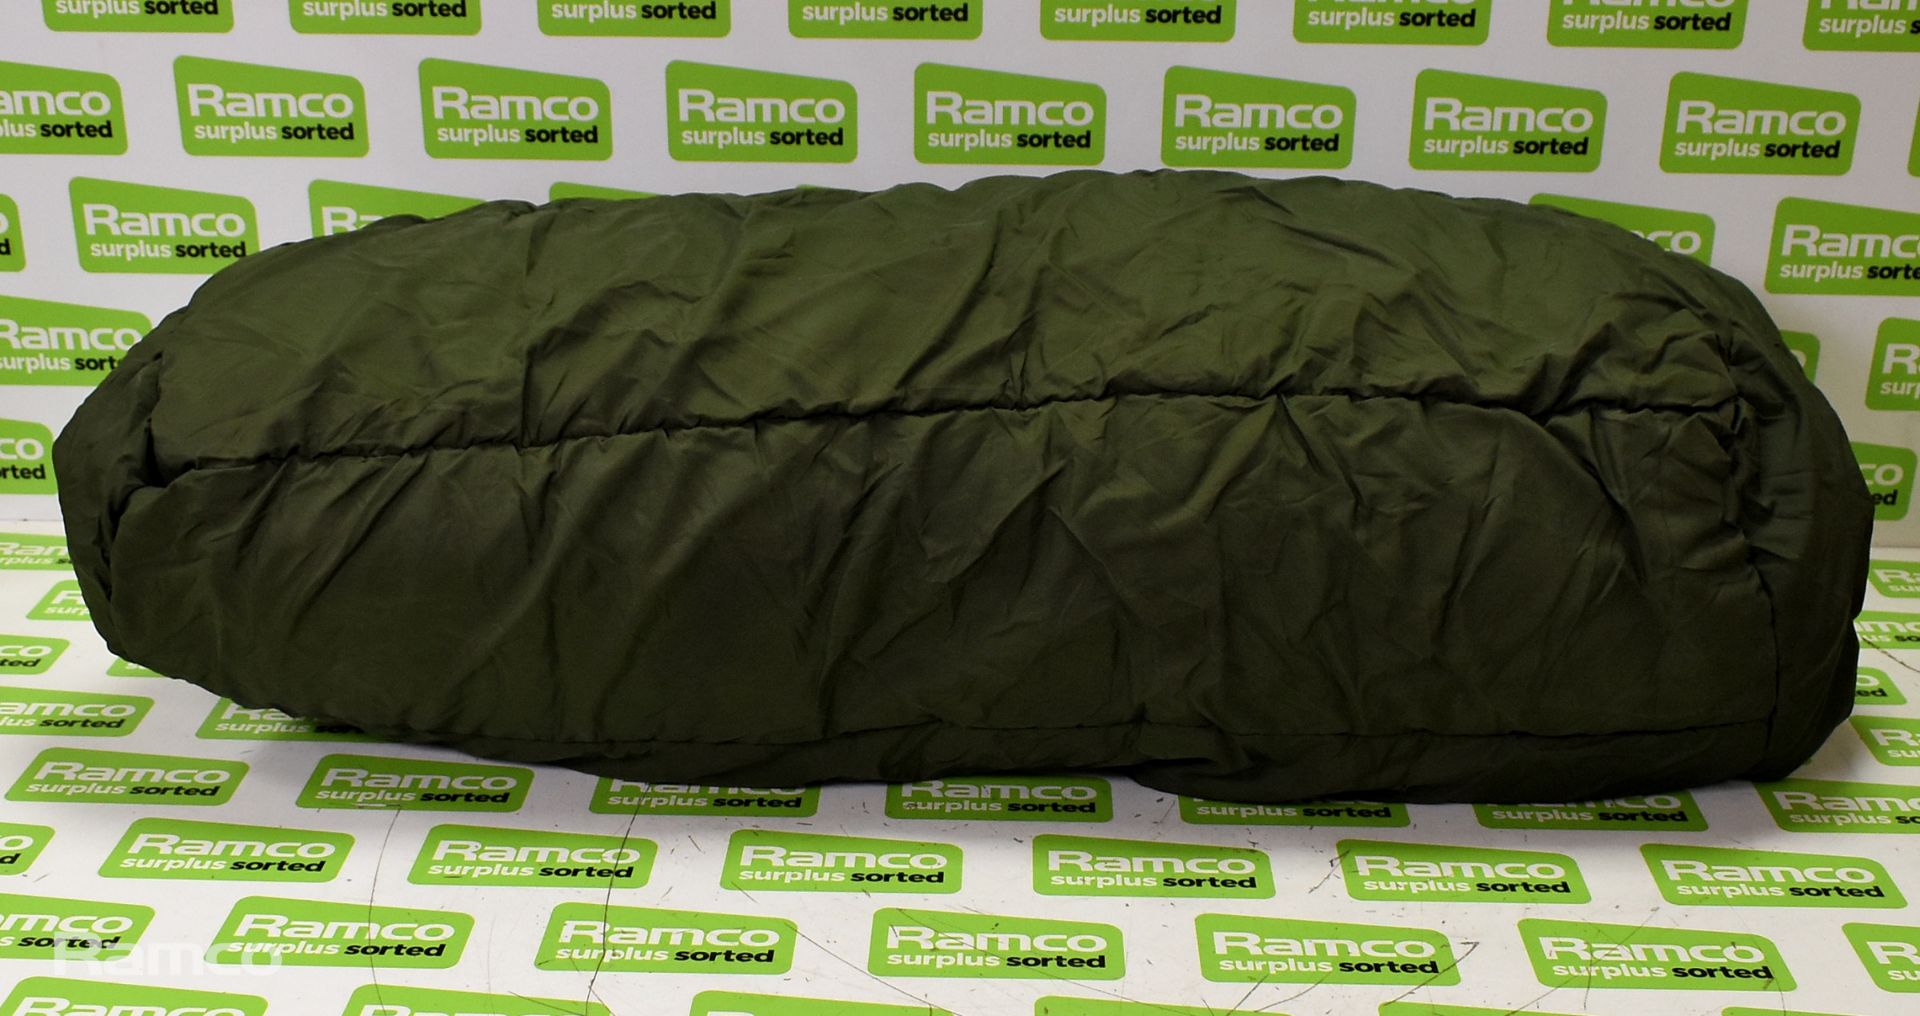 30x Sleeping bags - mixed grades and sizes - Image 8 of 8